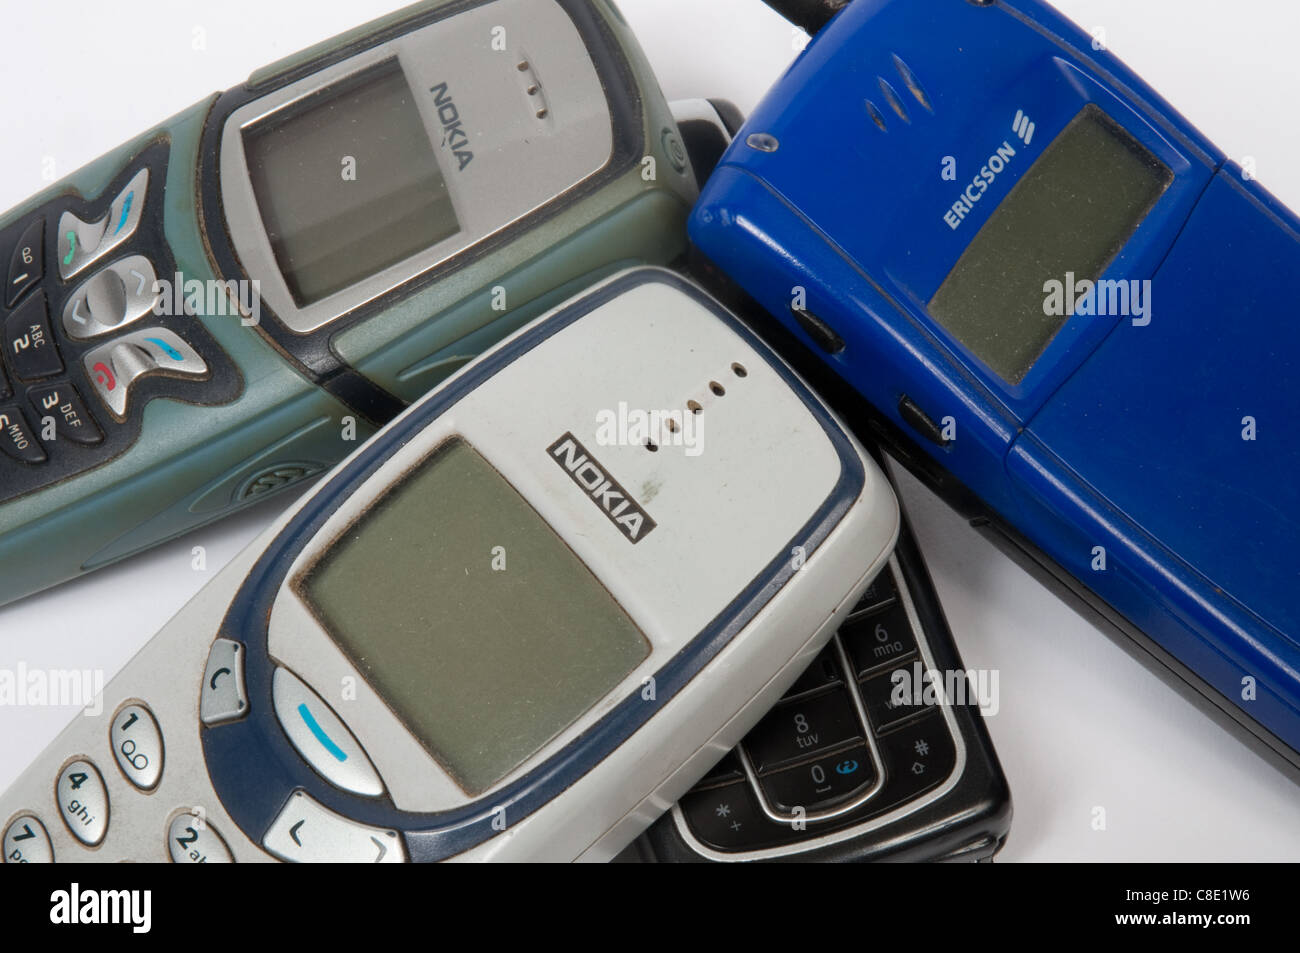 Old mobile phones Stock Photo